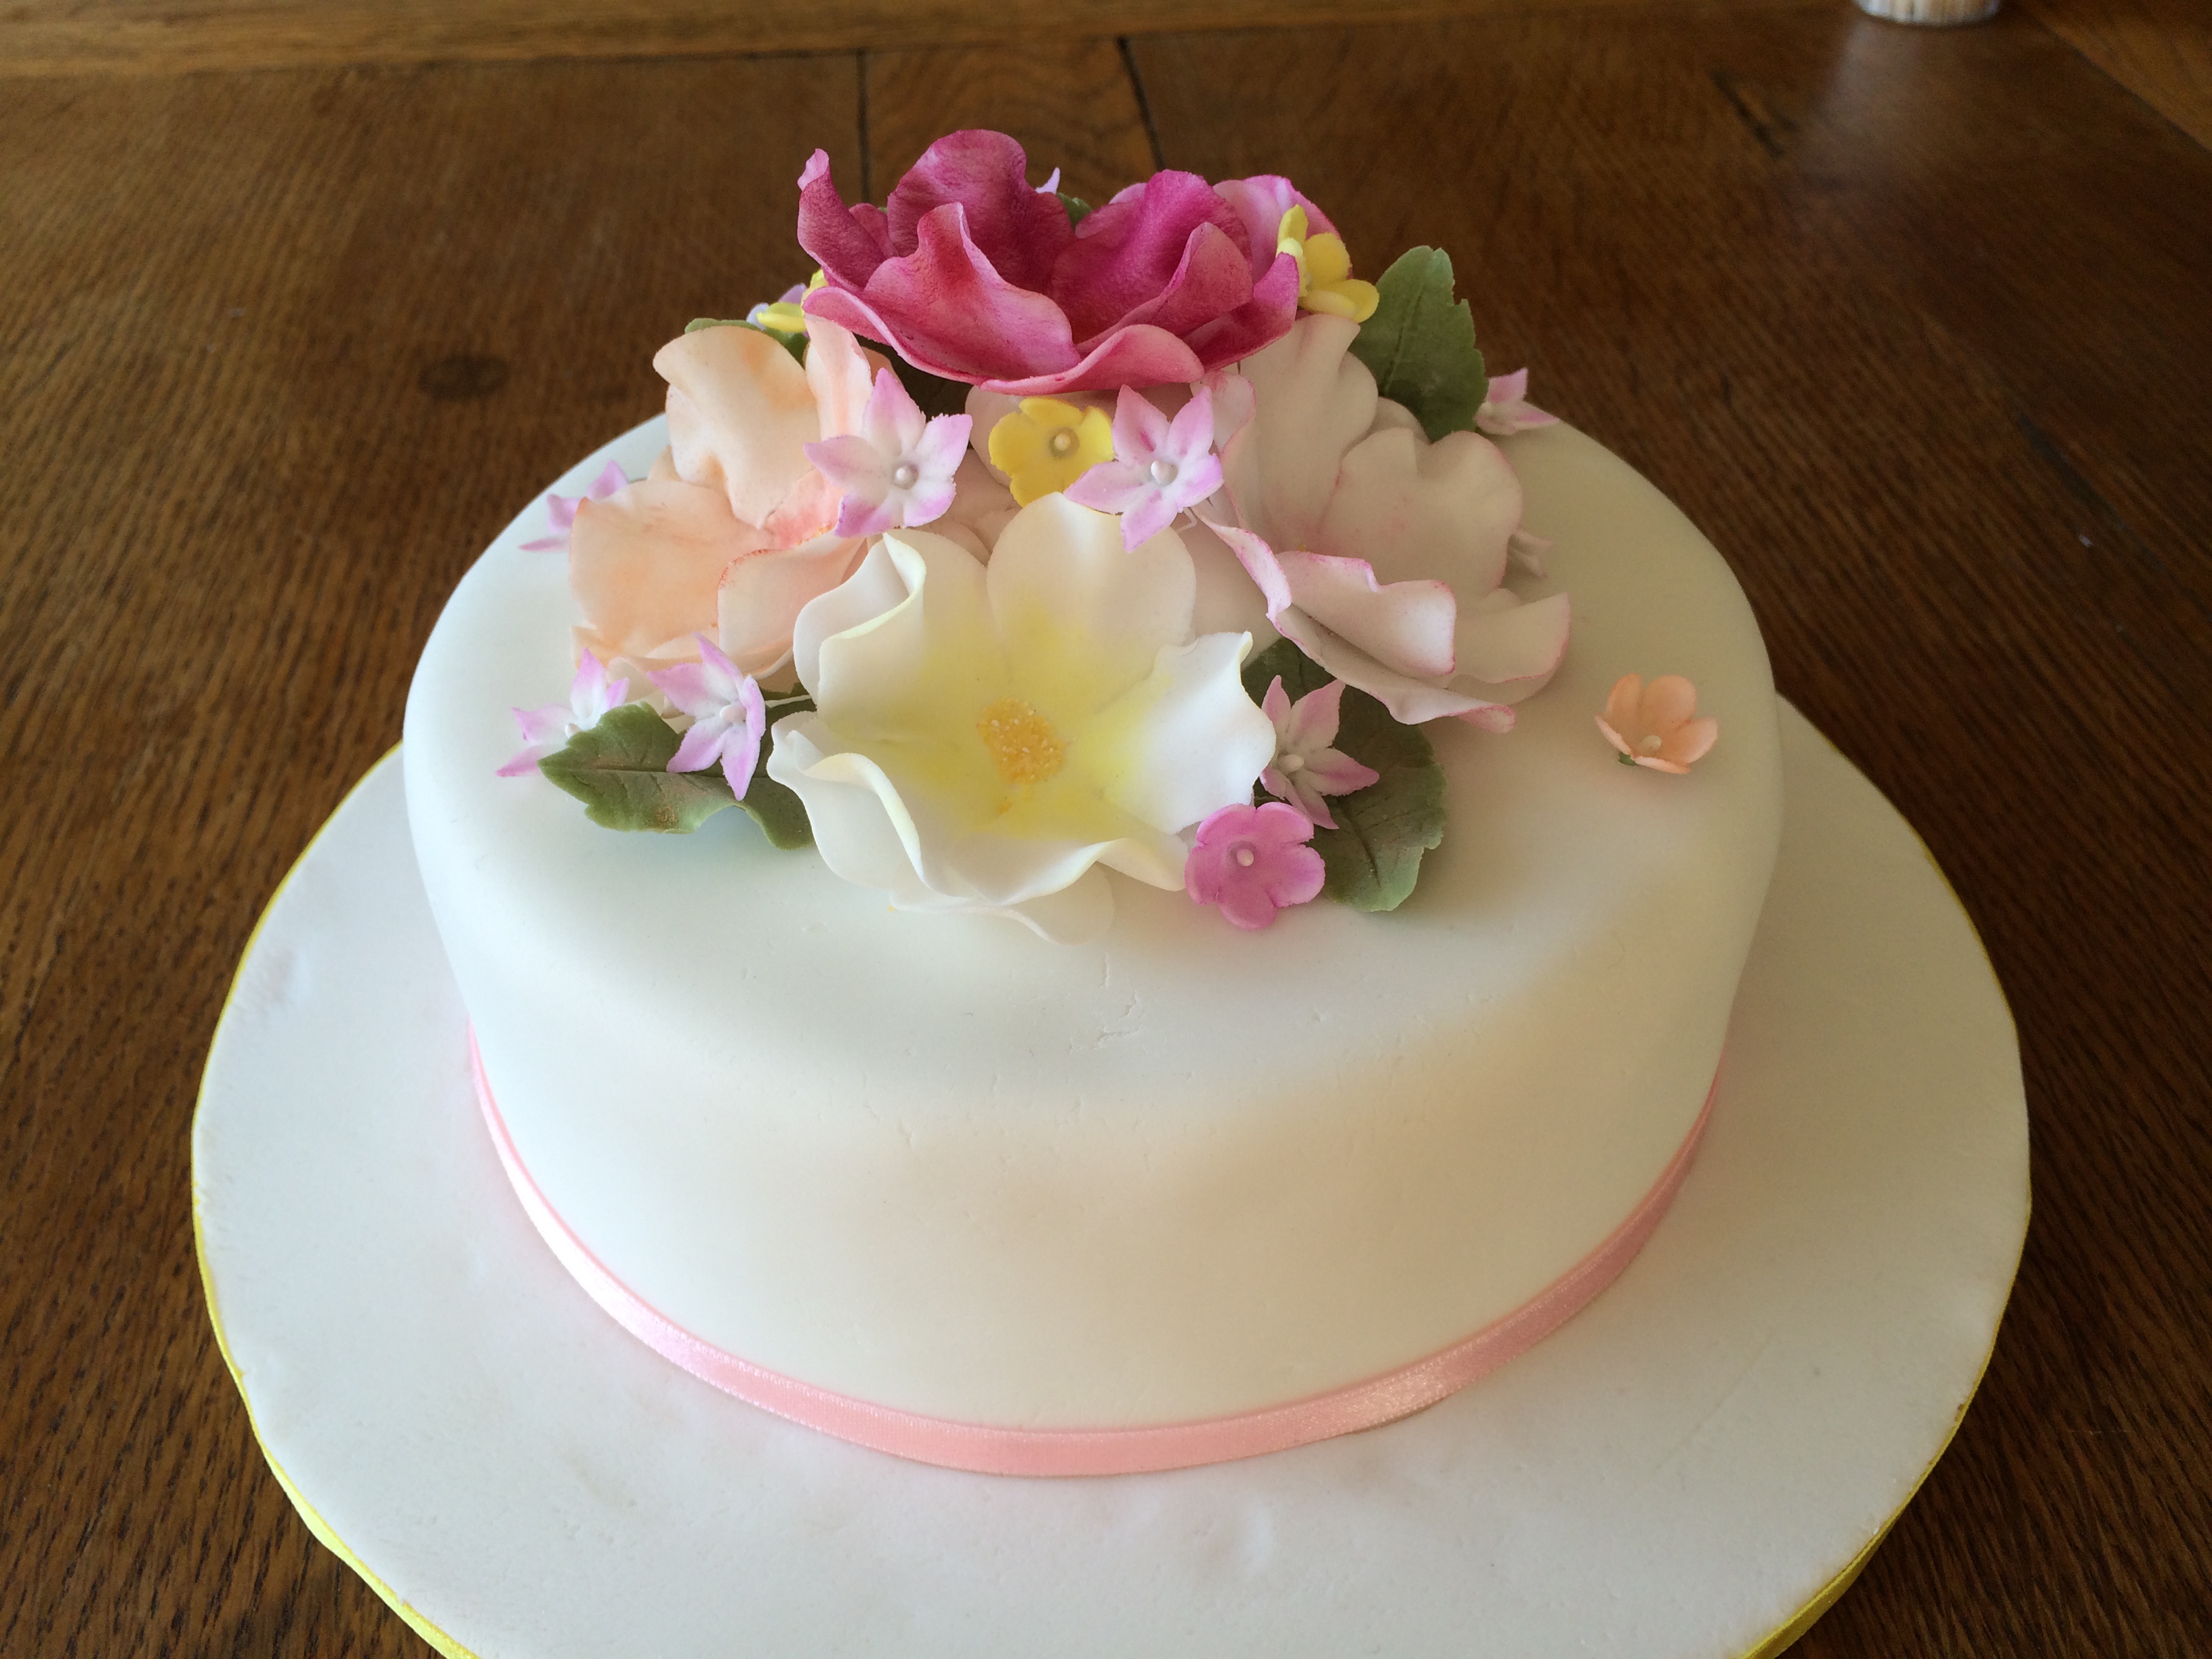 Cake Decorating Ideas with Flowers